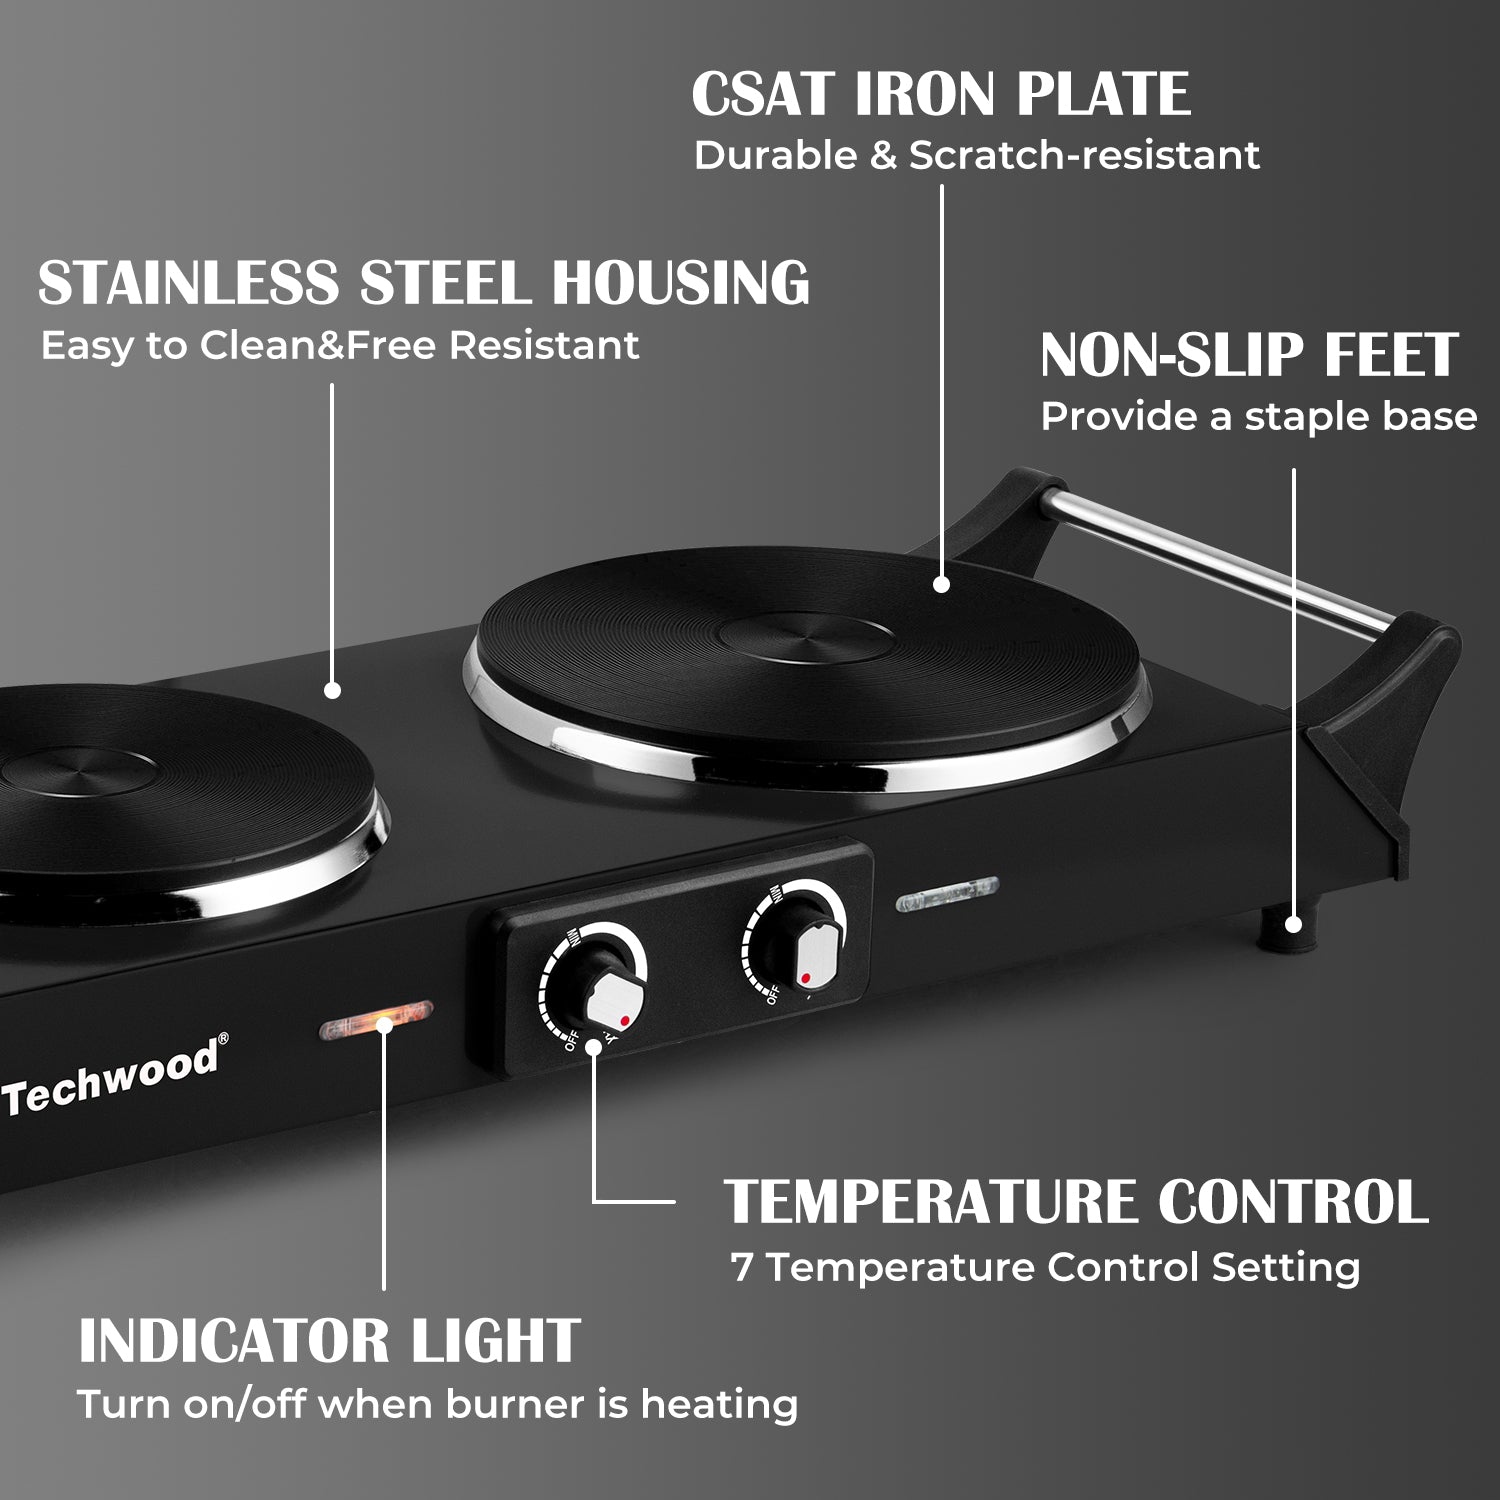 Techwood Hot Plate Portable Electric Stove 1500W Countertop Single Burner with Adjustable Temperature & Stay Cool Handles, 7.5